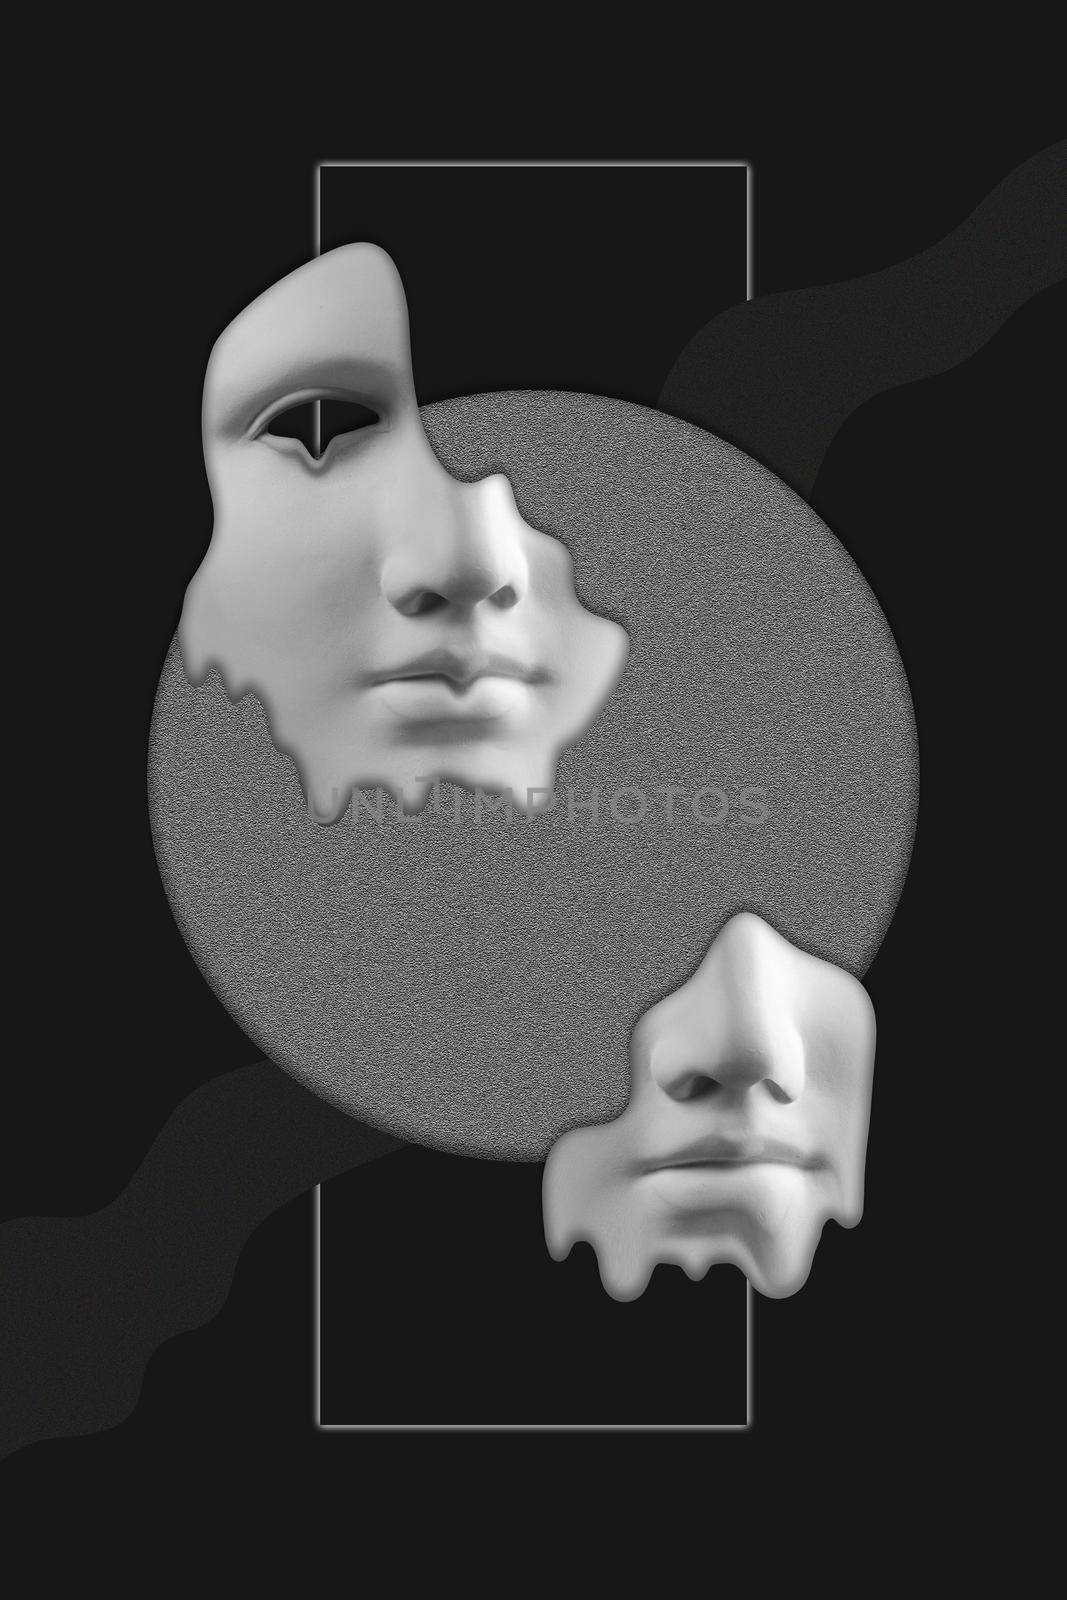 Antique sculpture of woman face surreal collage in pop art style. Modern image with cut details of statue head on a black. Dark concept. Zine culture. Contemporary art poster. Funky retro minimalism.